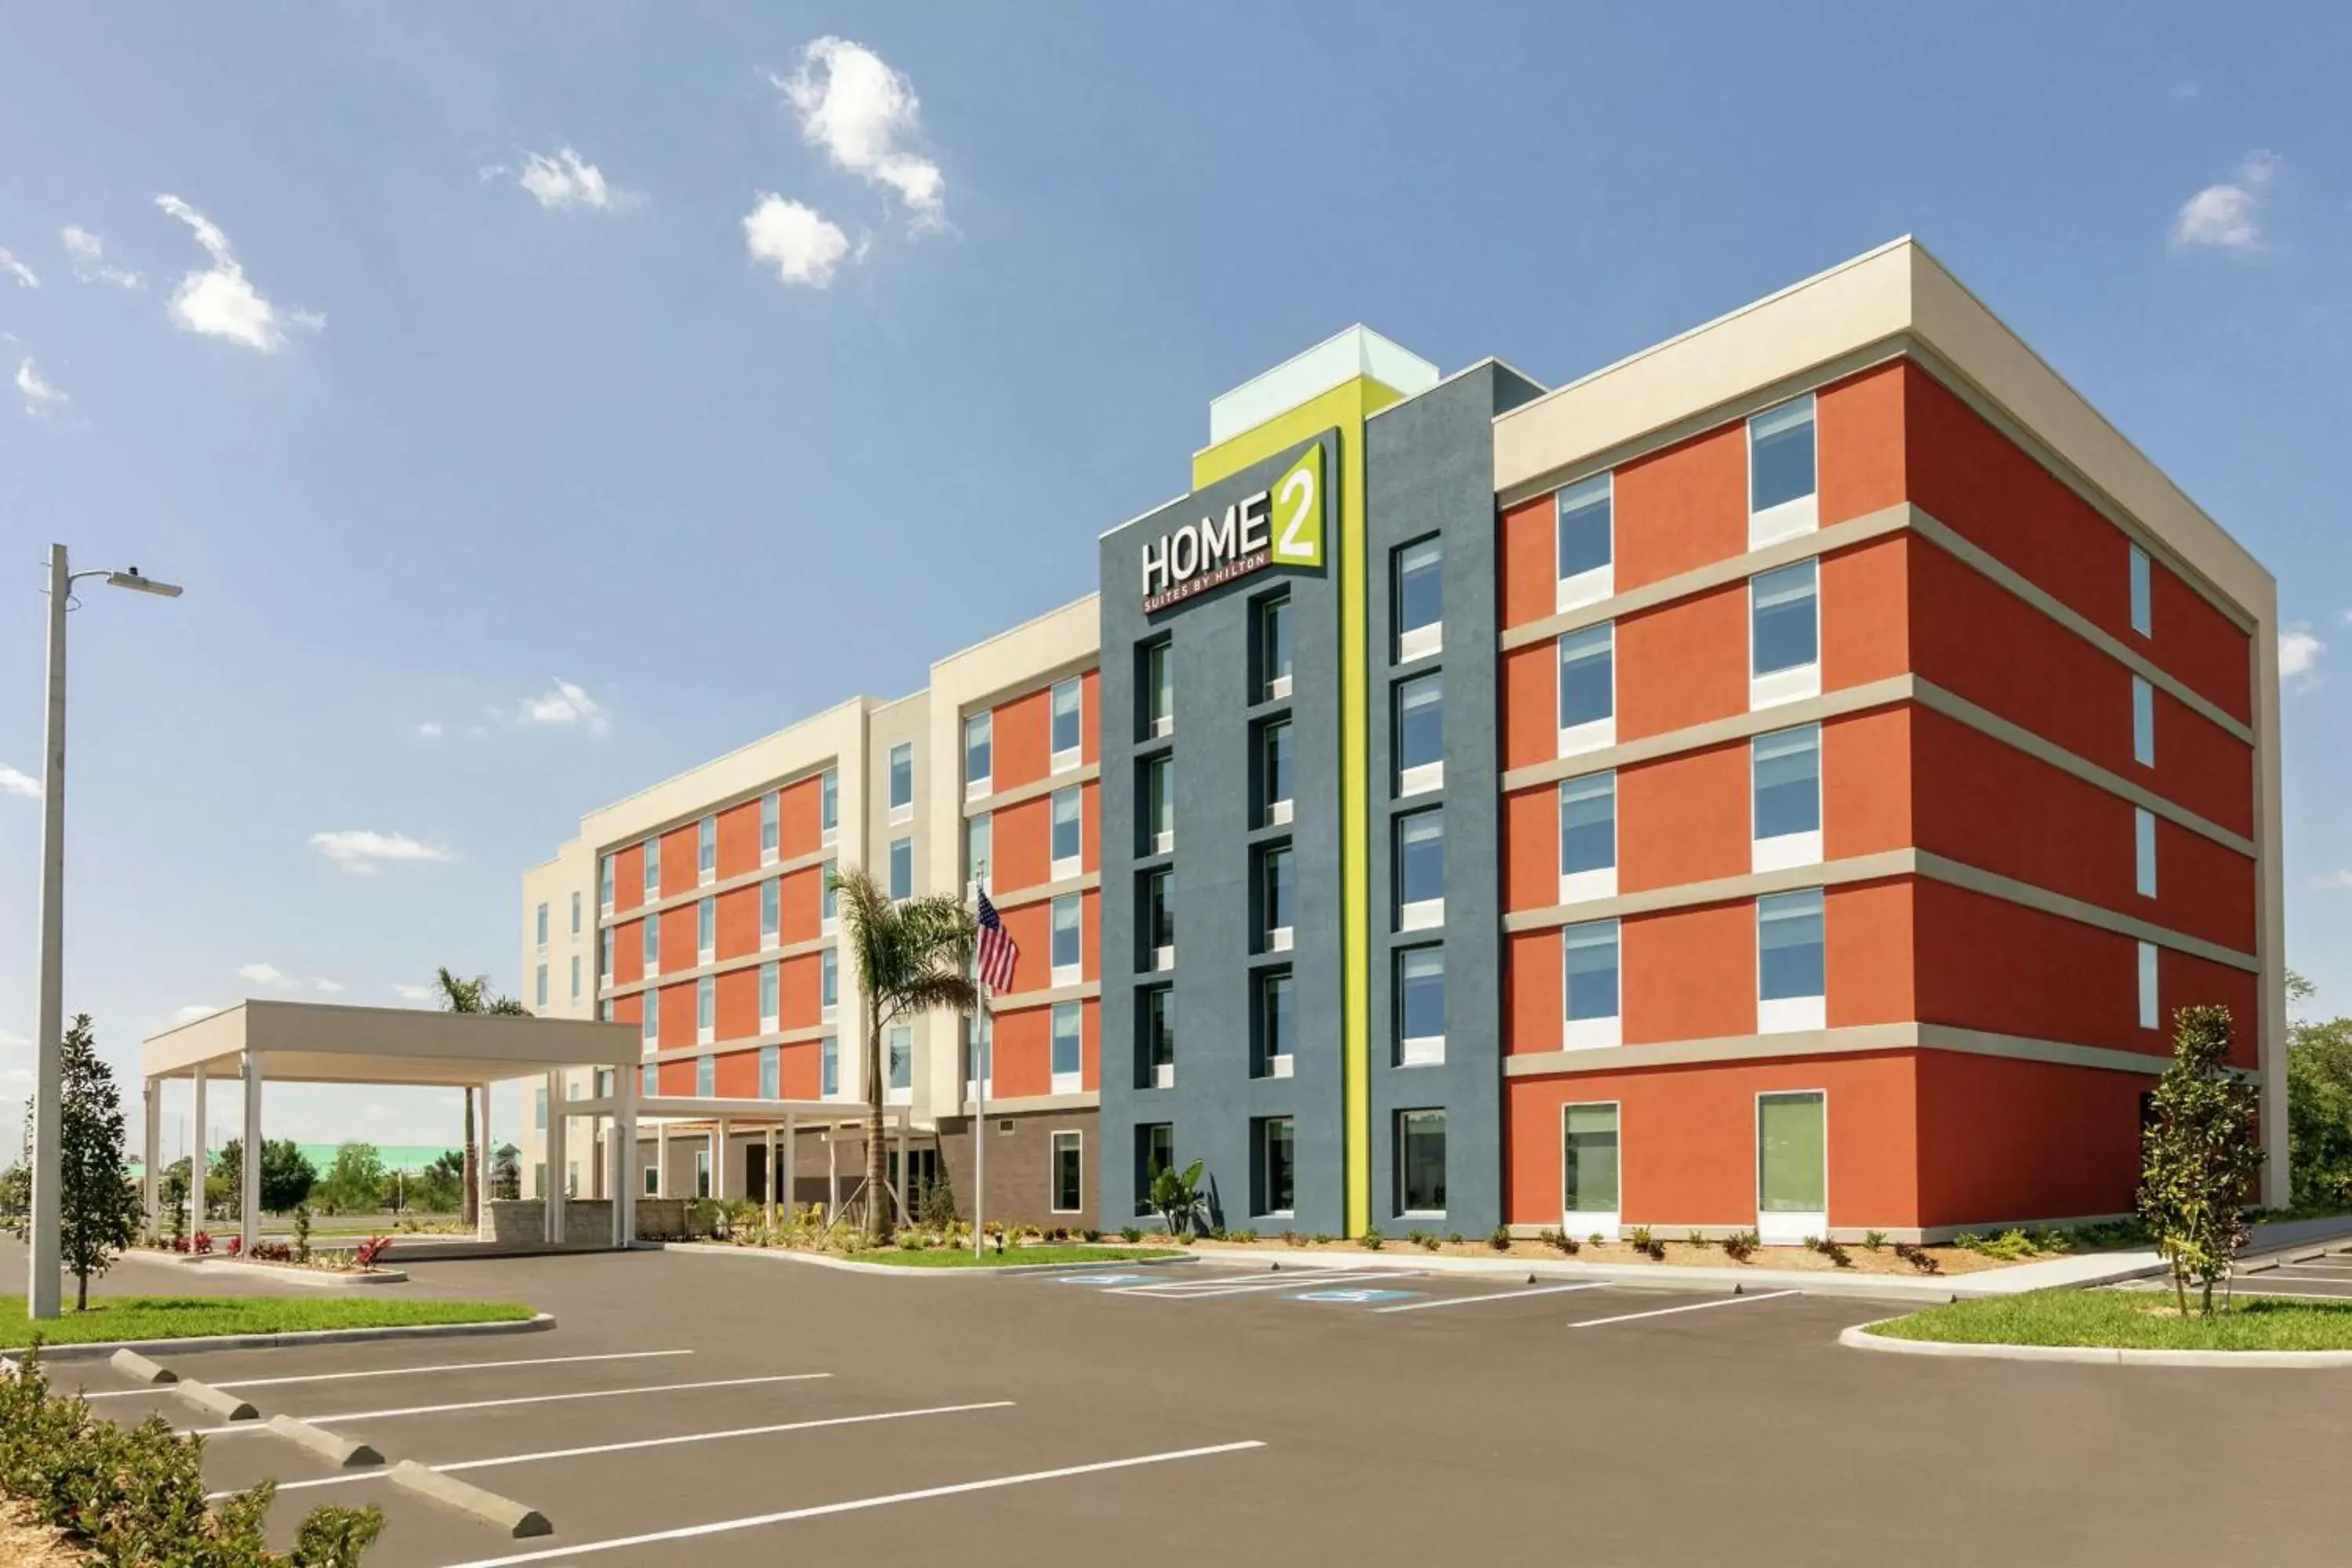 Property Building in Home2 Suites By Hilton Brandon Tampa